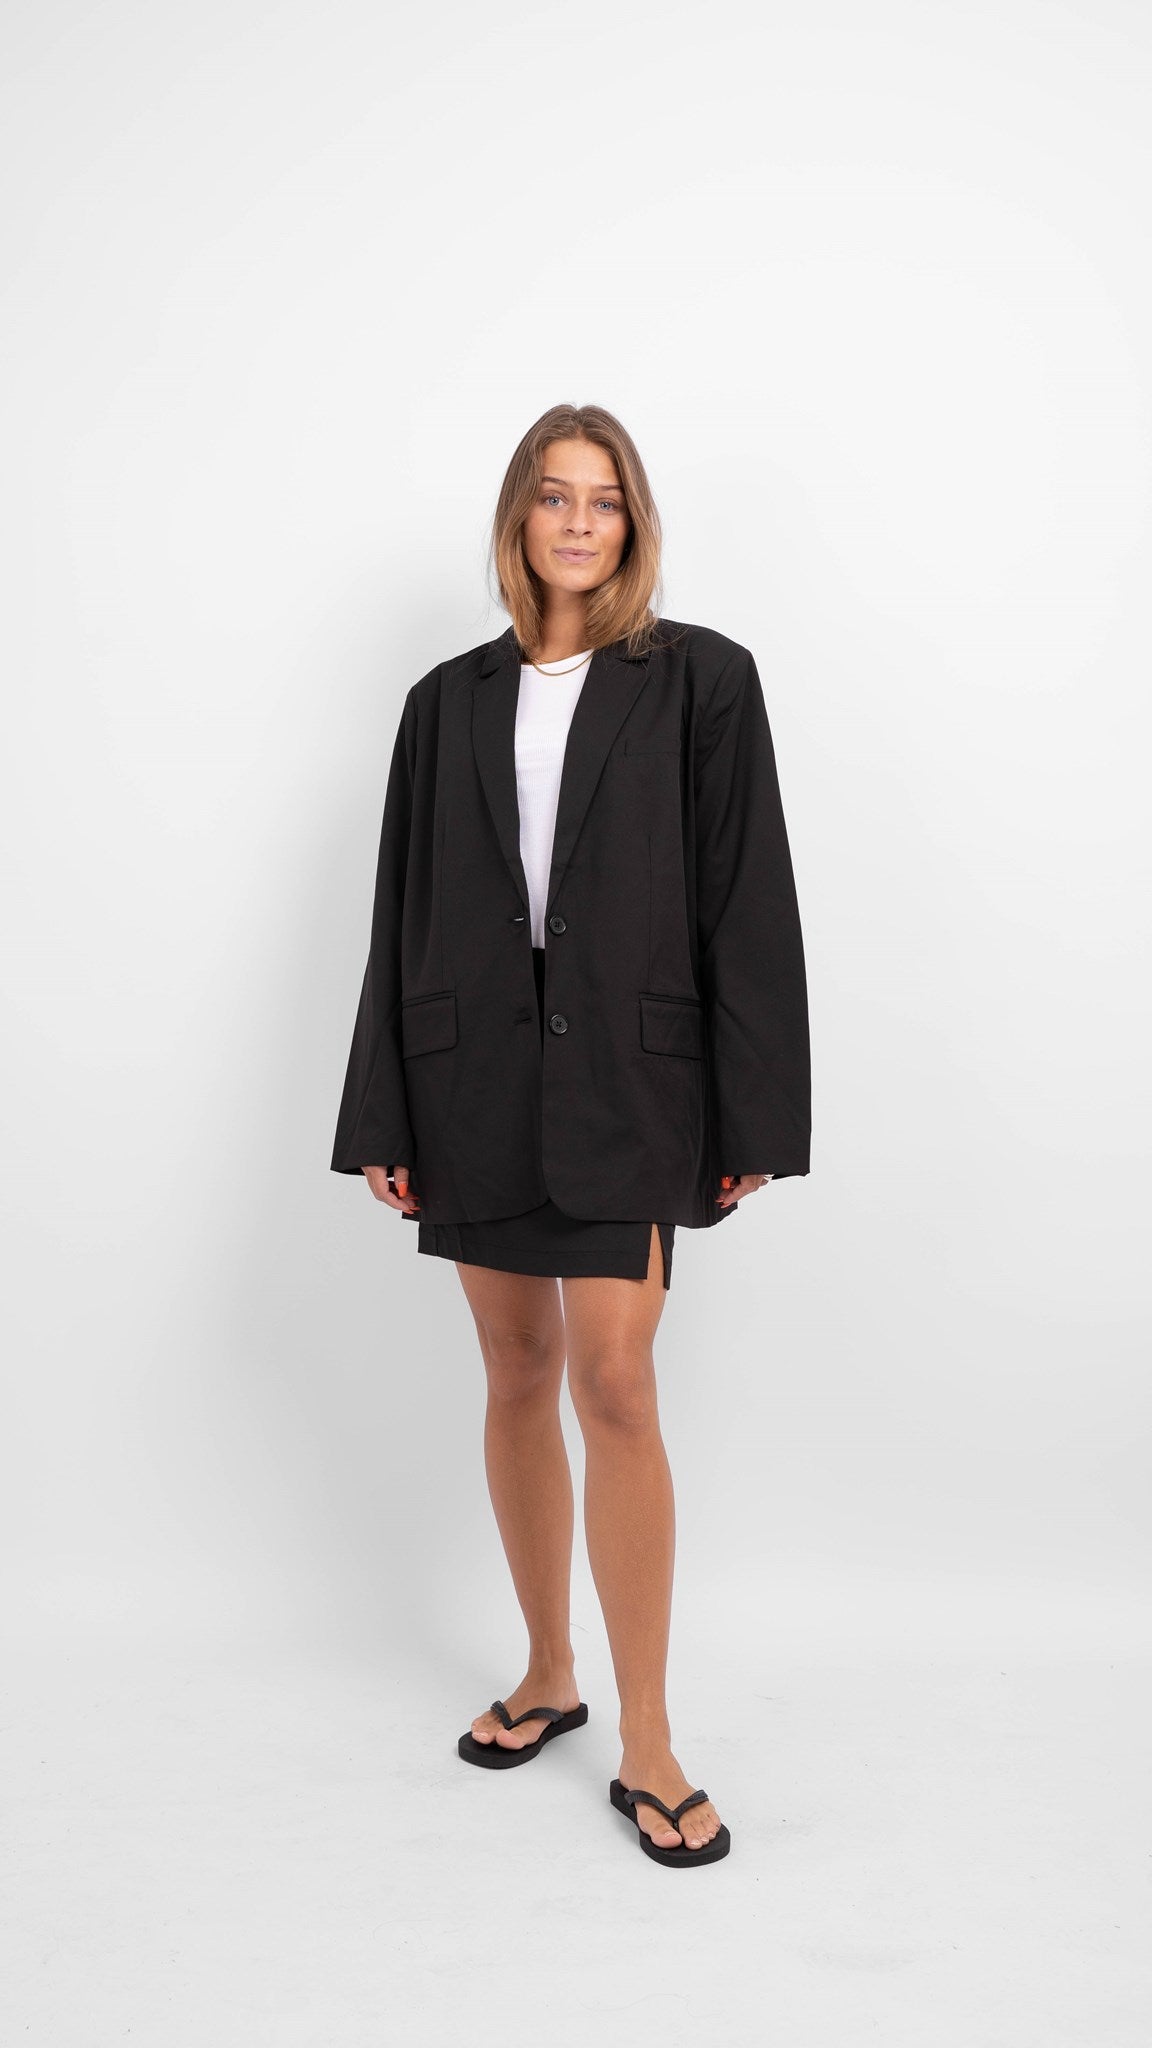 Step into Confidence: Shop Our Selection of Women's Blazers